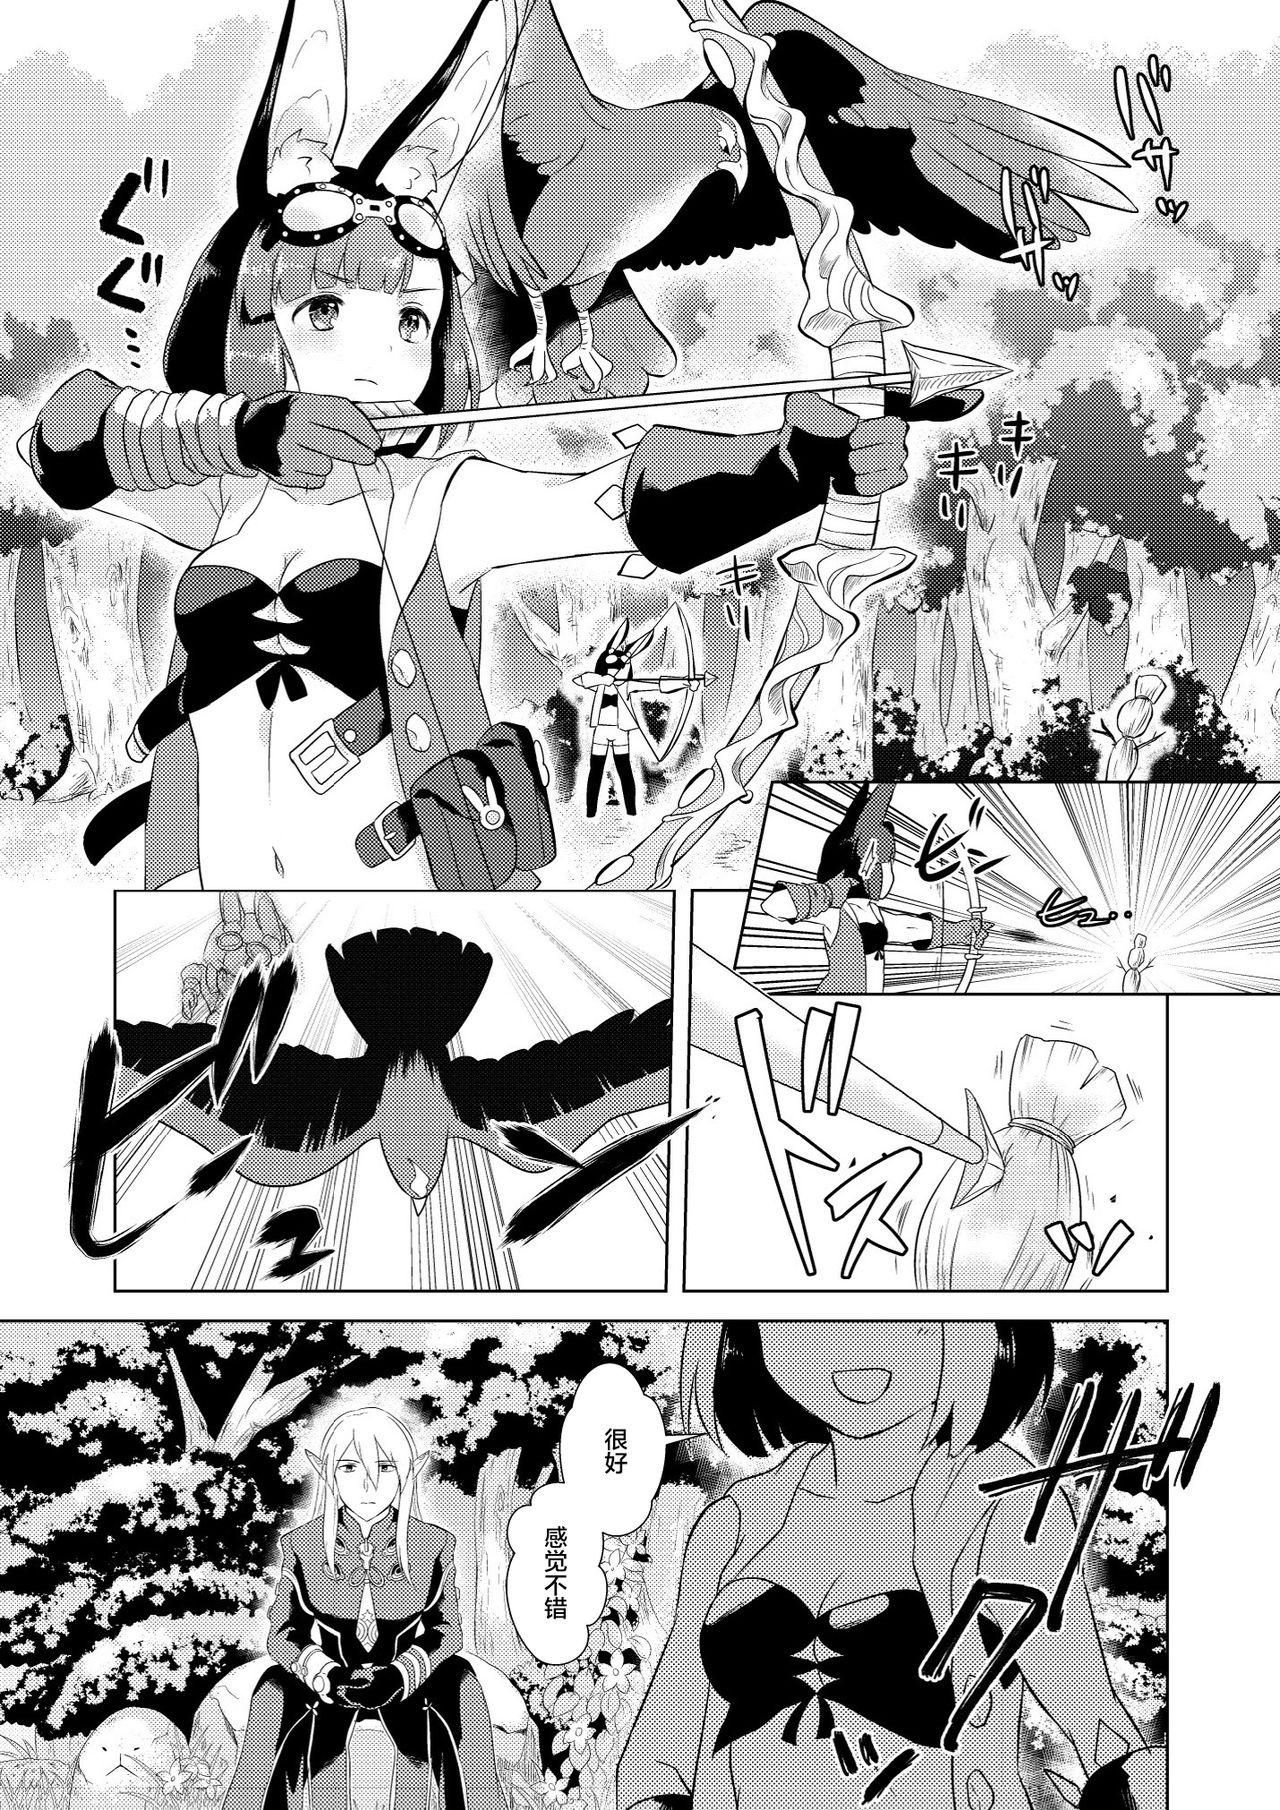 Chibola Hunting! - I'm sure I'll get your heart! - Etrian odyssey | sekaiju no meikyuu Young Petite Porn - Page 5